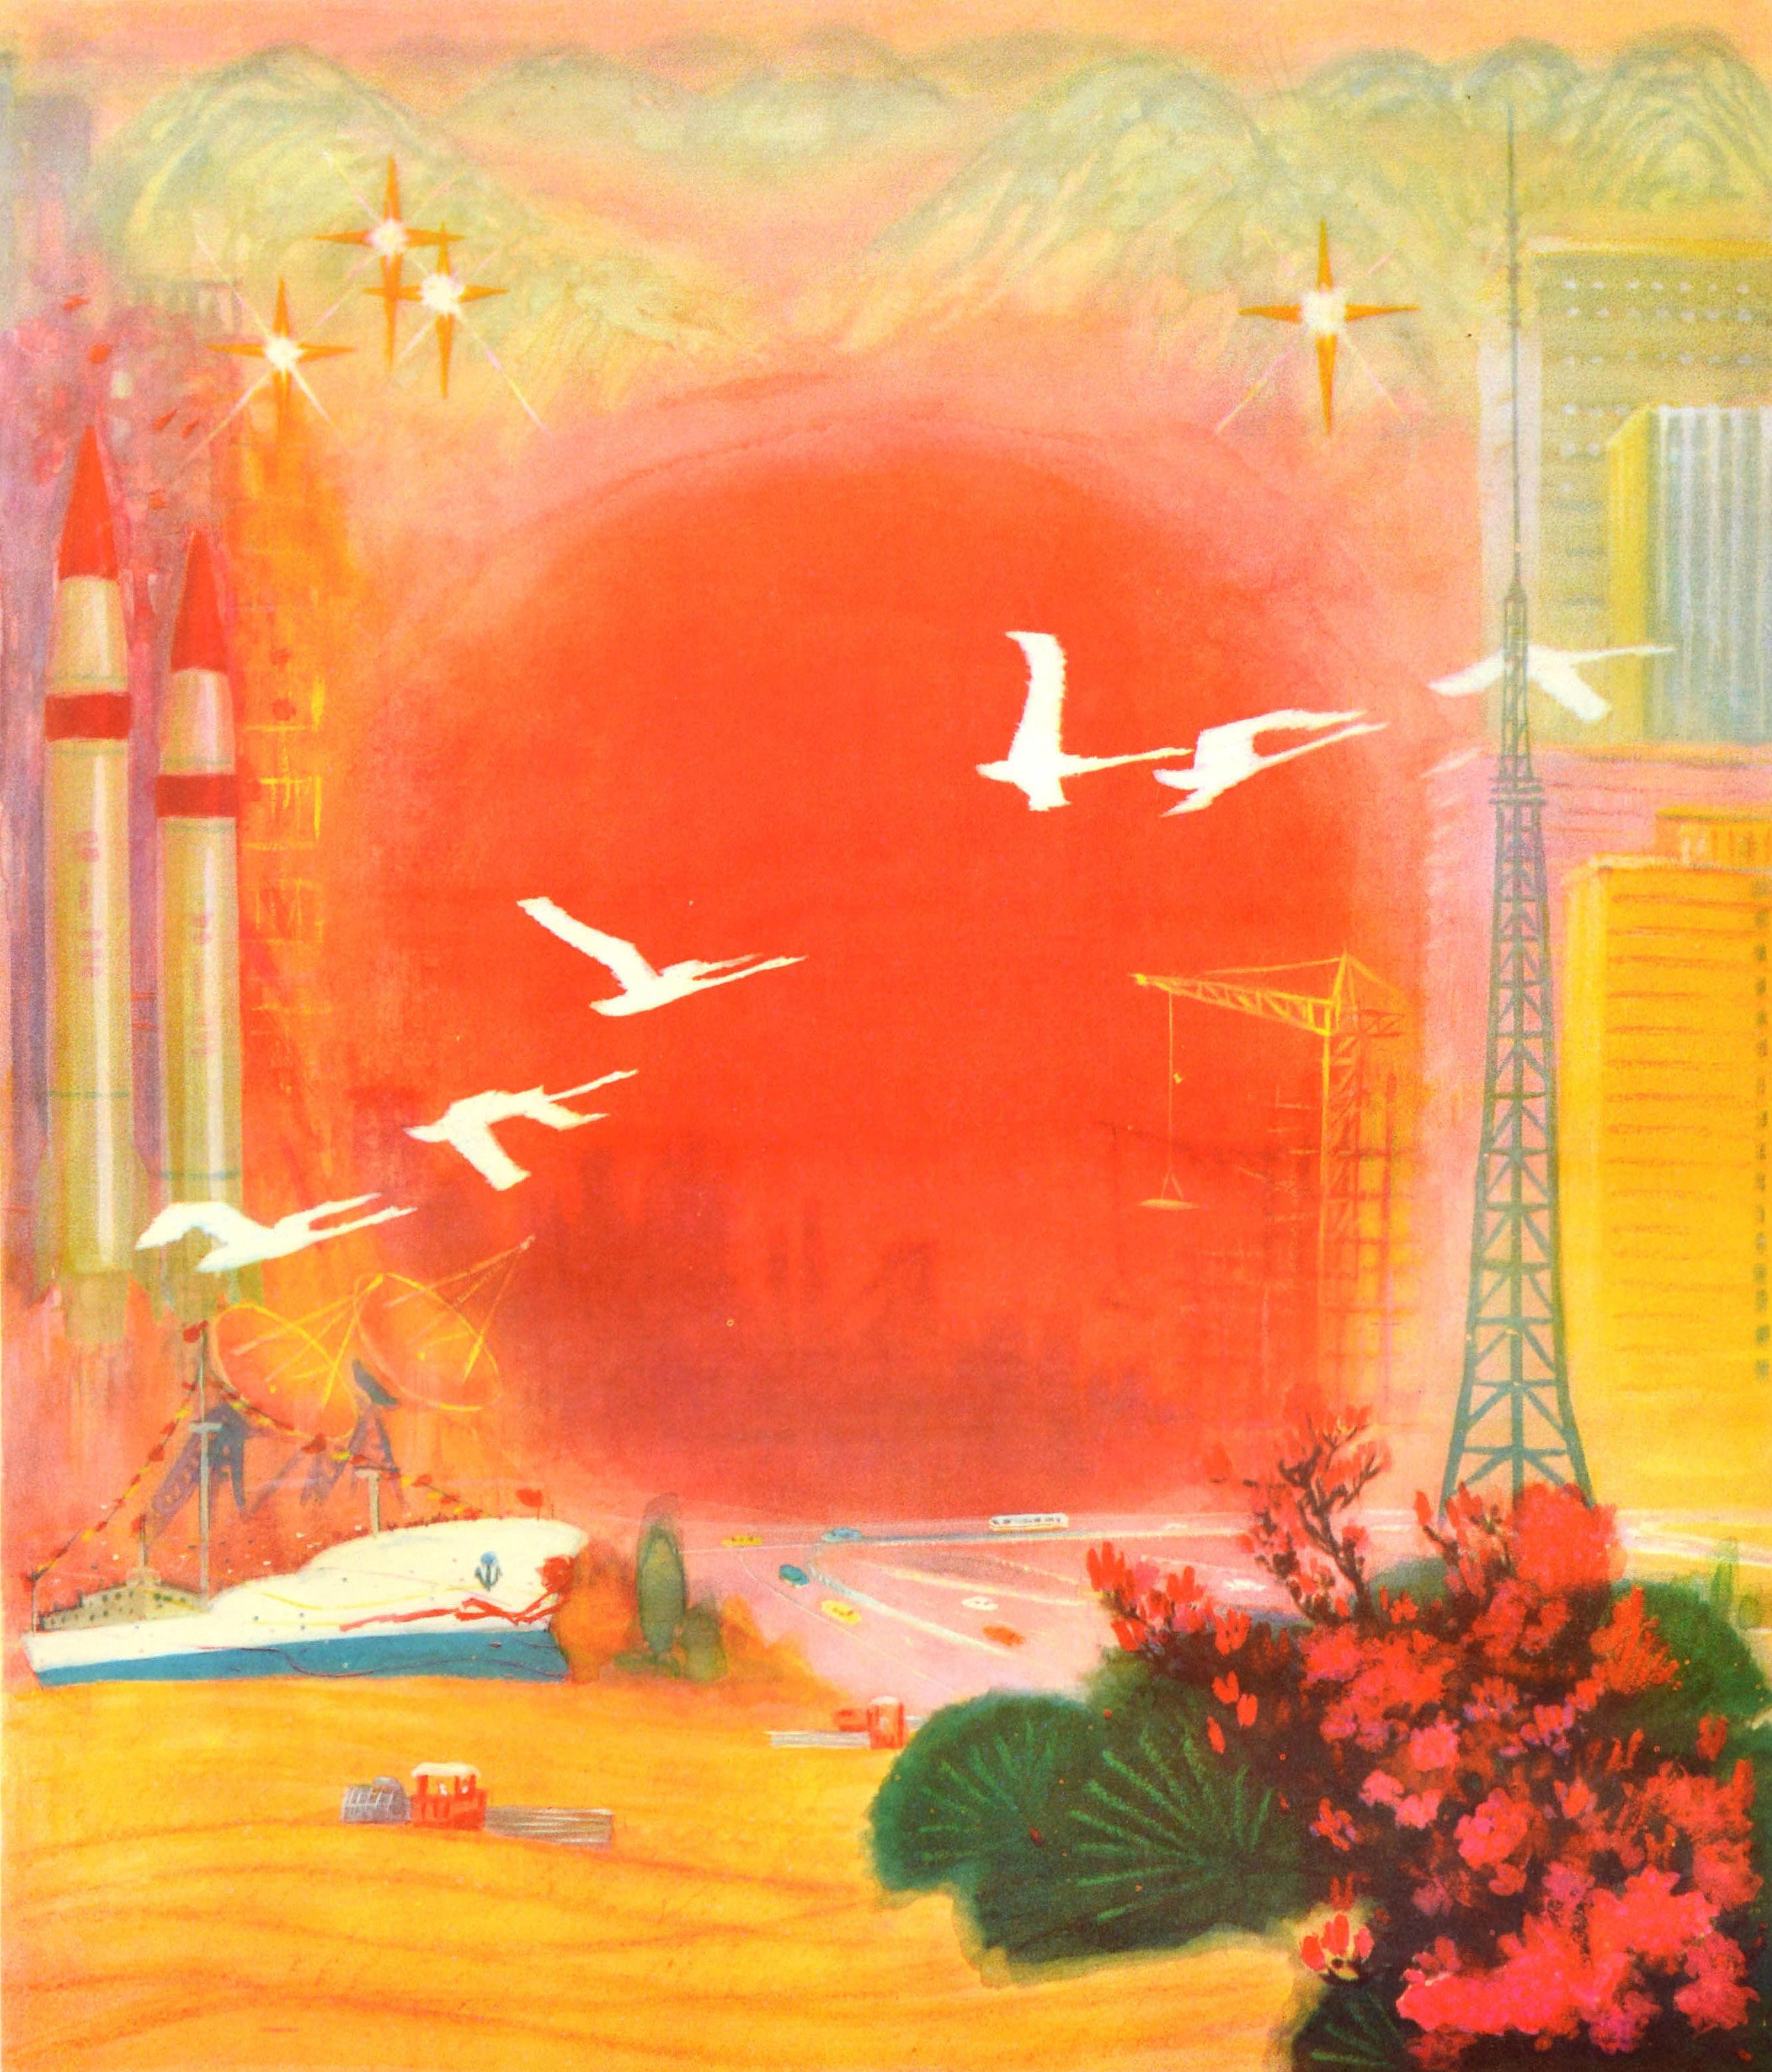 Original vintage Chinese Communist Party propaganda poster - Unite and work hard to build the four modernizations / 团结奋斗 建设四化 - featuring an illustration of white birds flying across a busy road, marine ship, electric or communications tower,